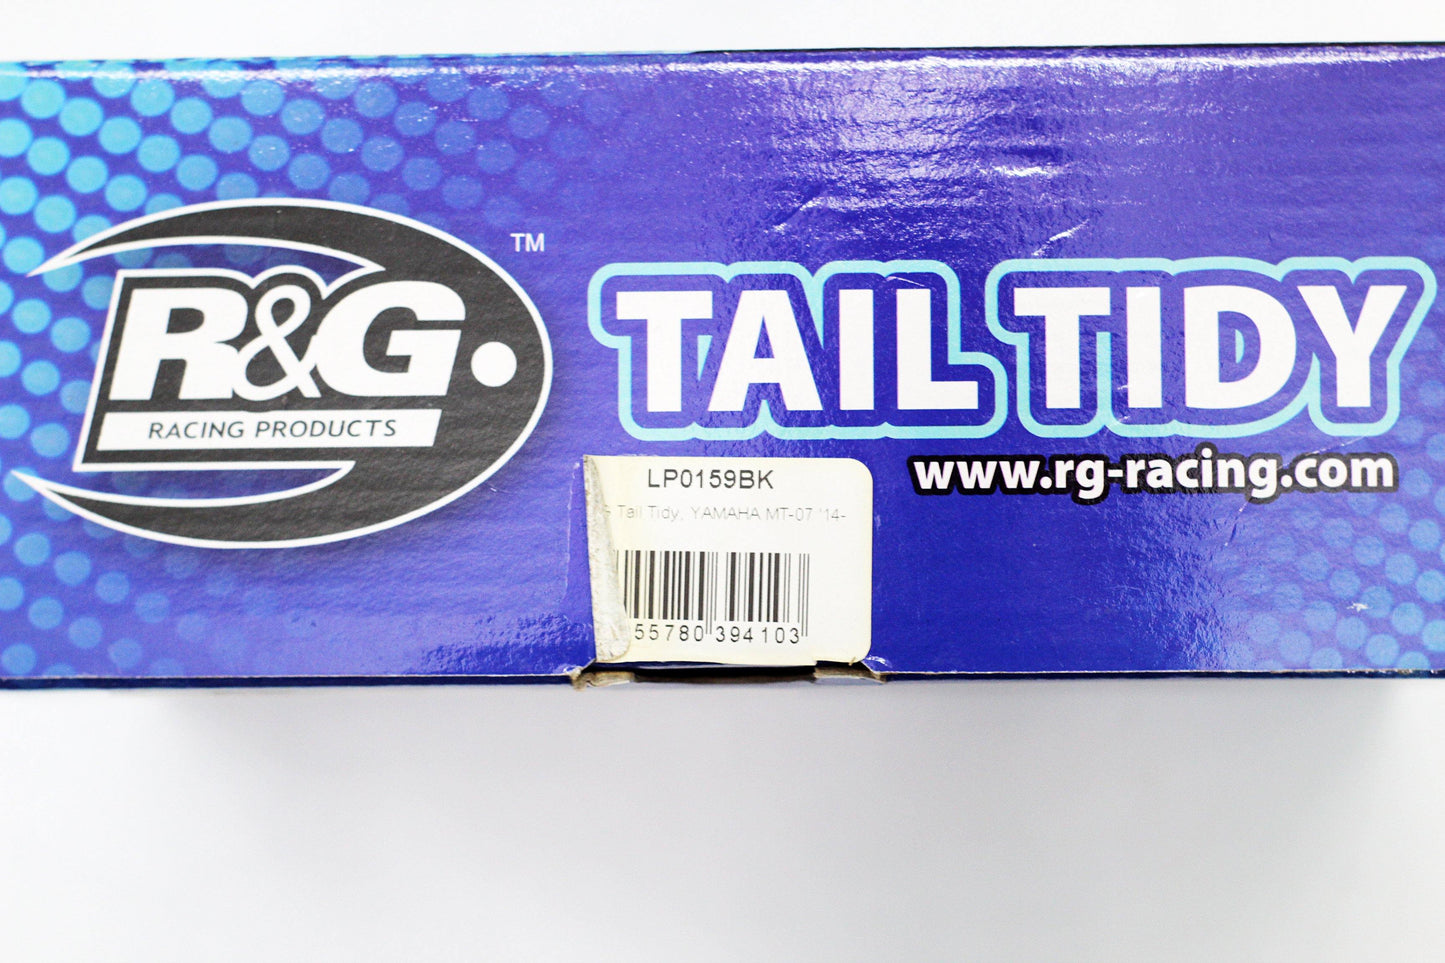 R&G Tail Tidy fits for Yamaha MT-07 (FZ-07) Models - Durian Bikers